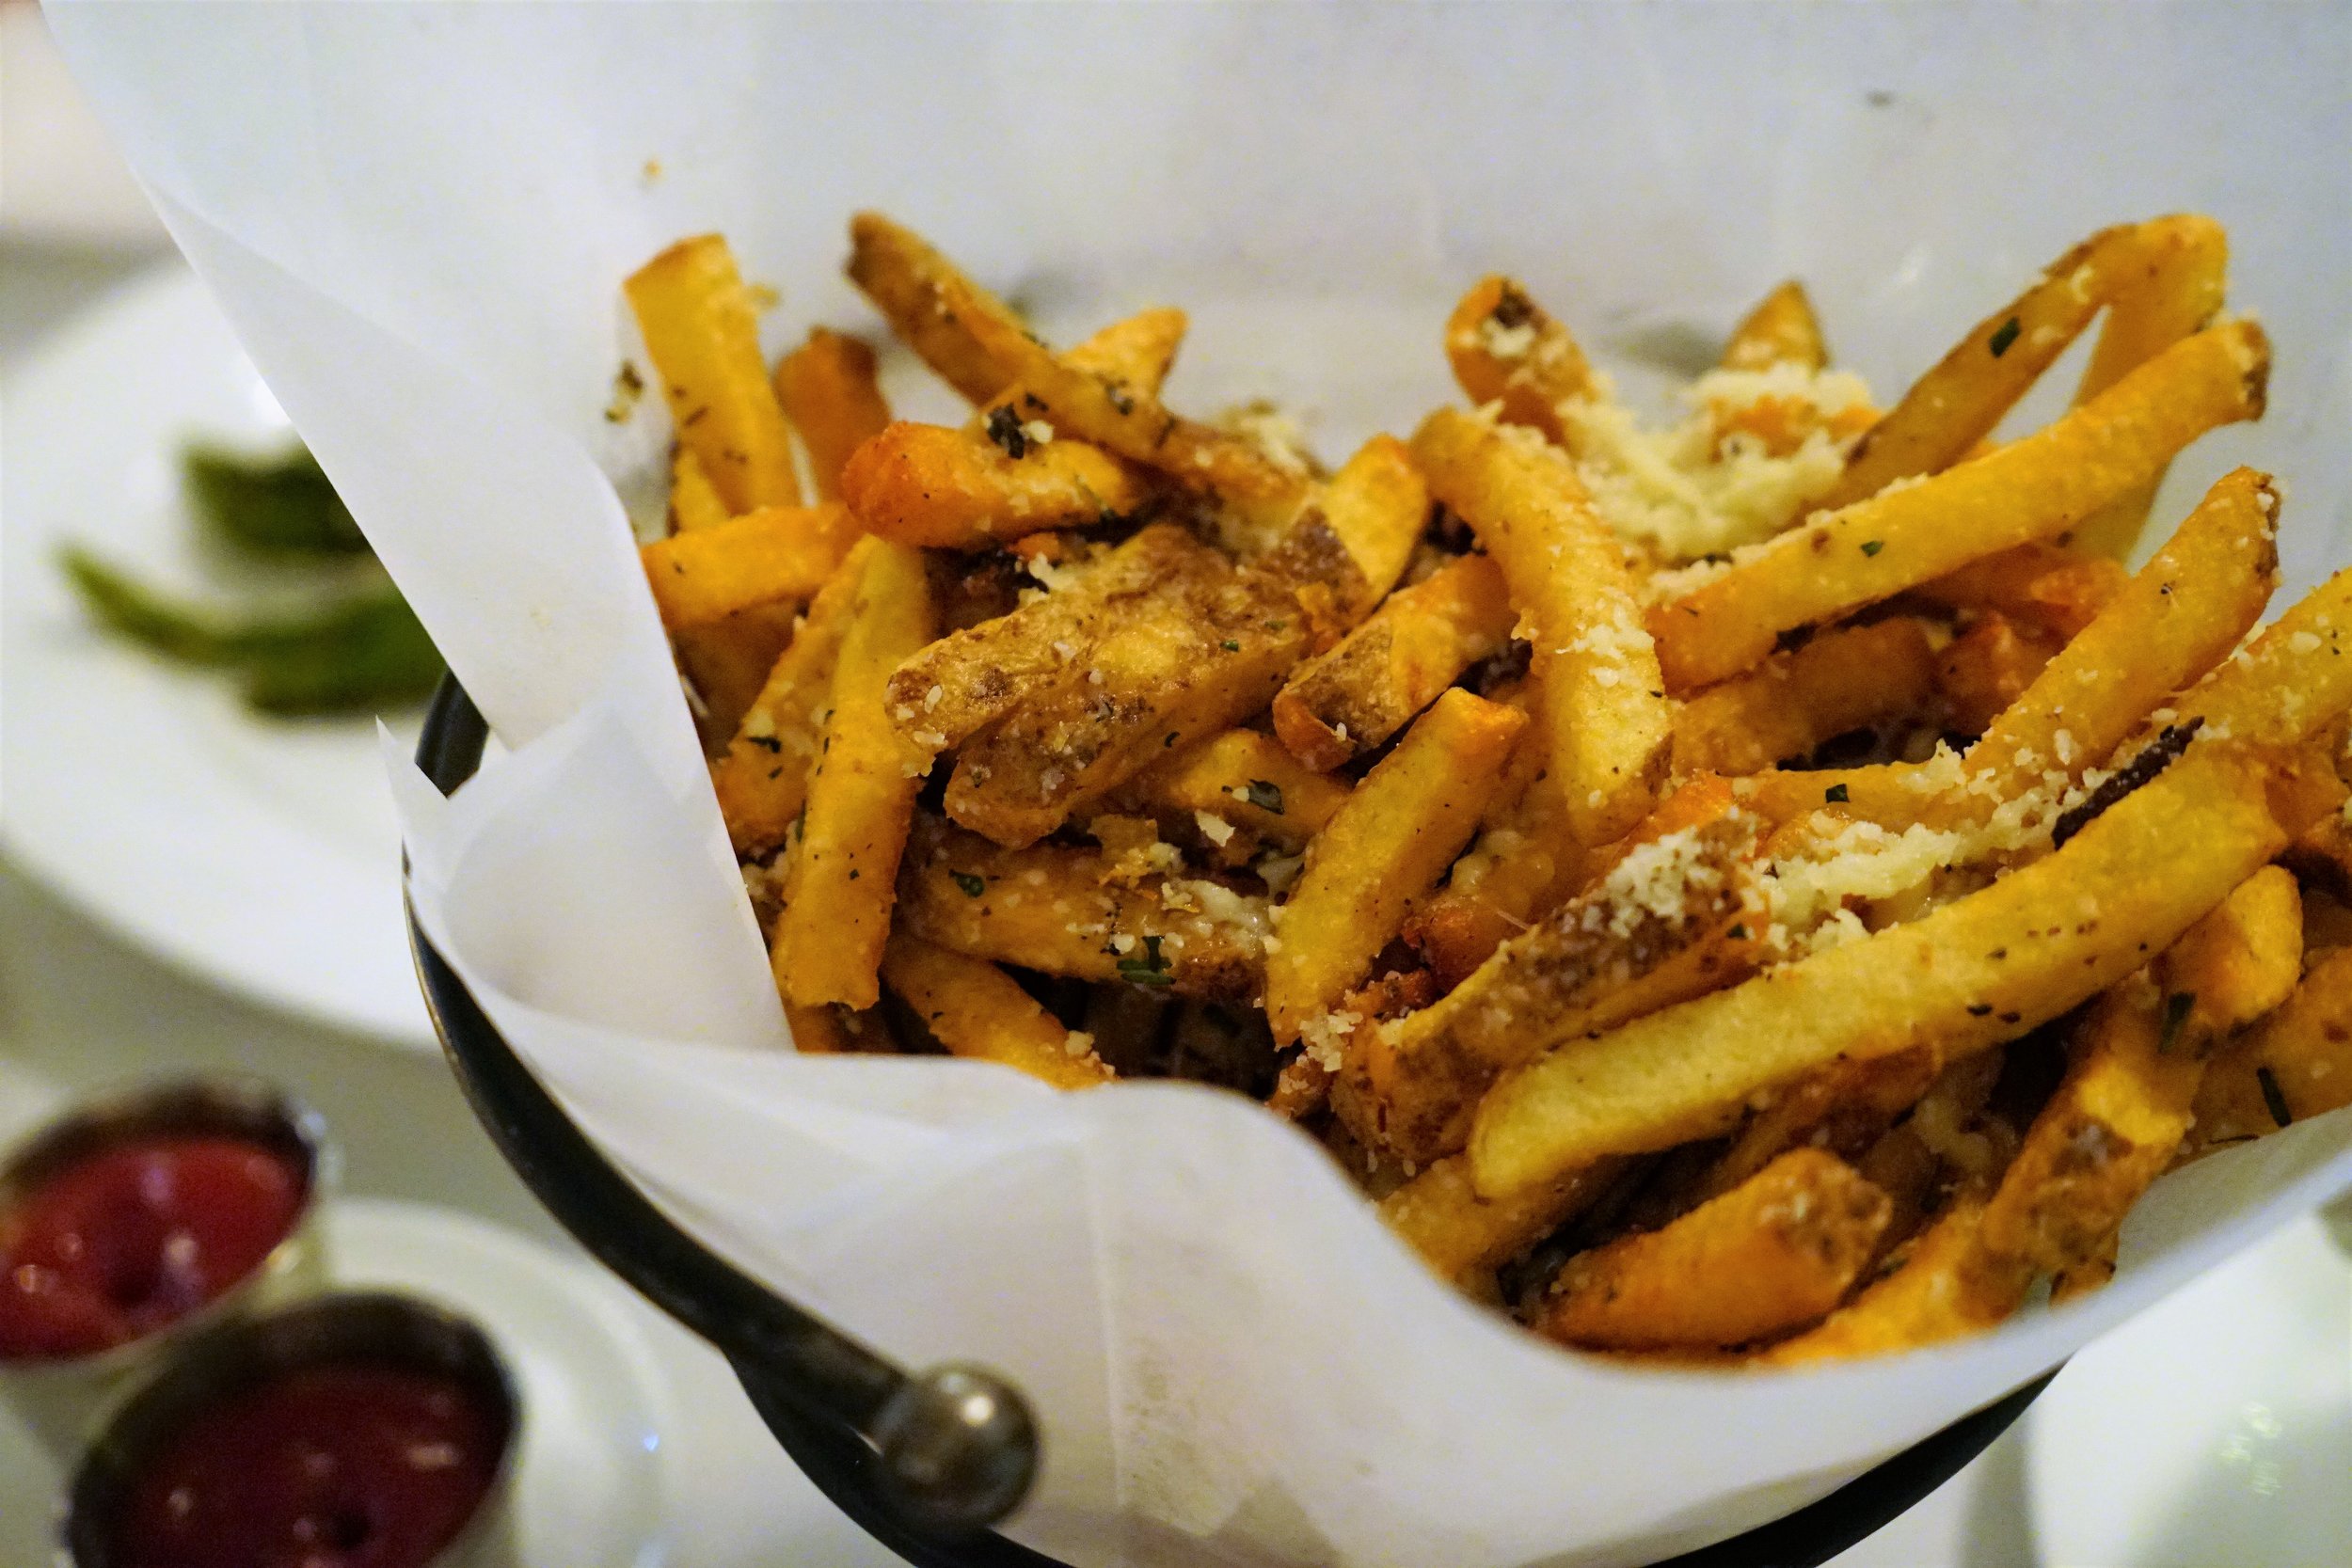 House Cut Fries at Marliave in Boston